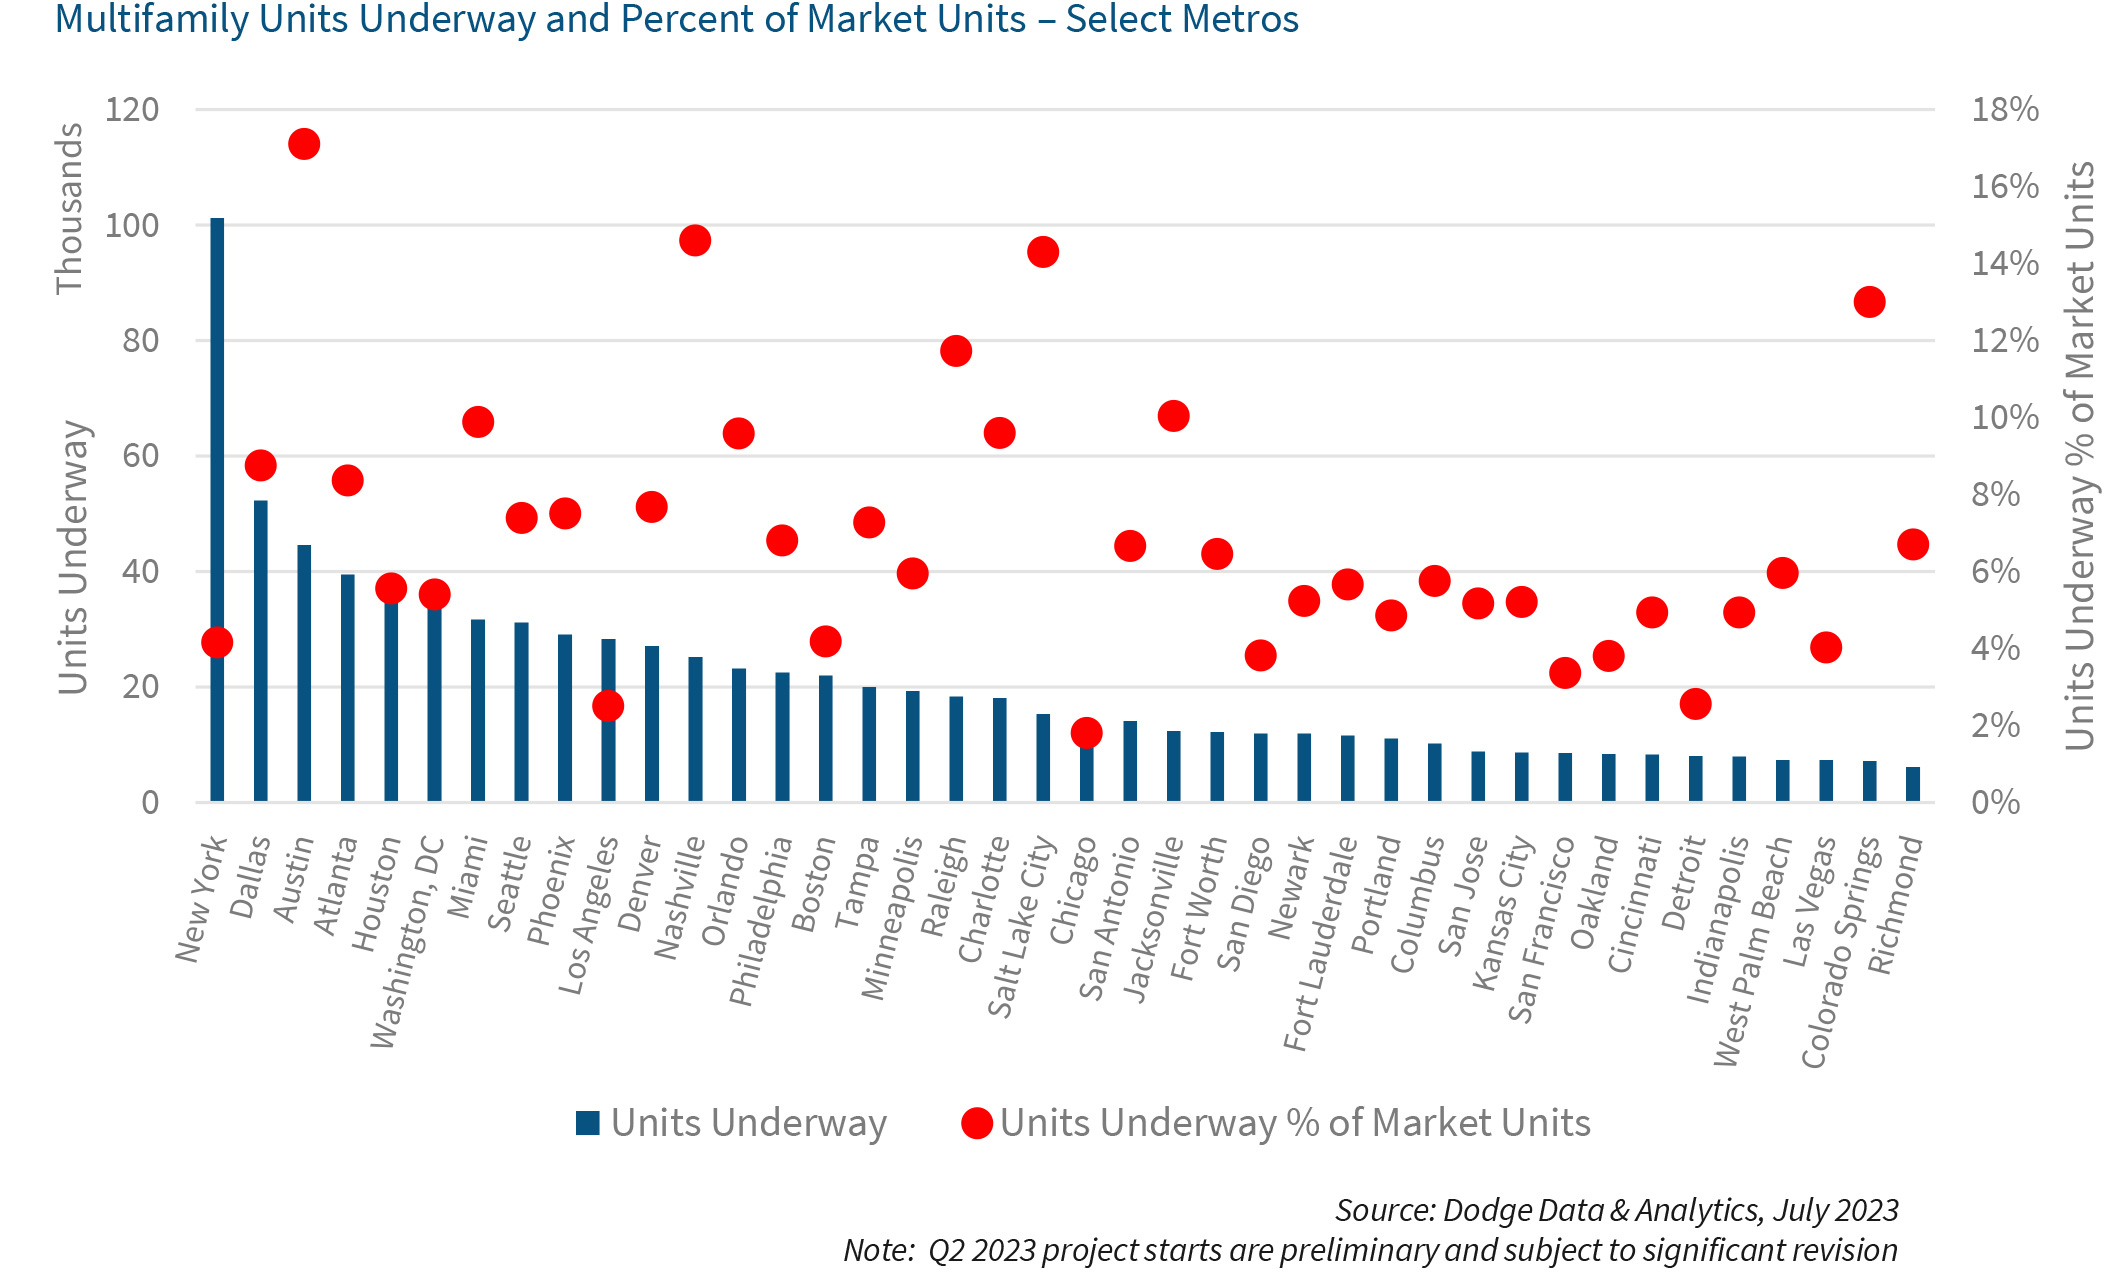 Multifamily Units Underway and Percent of Market Units – Select Metros